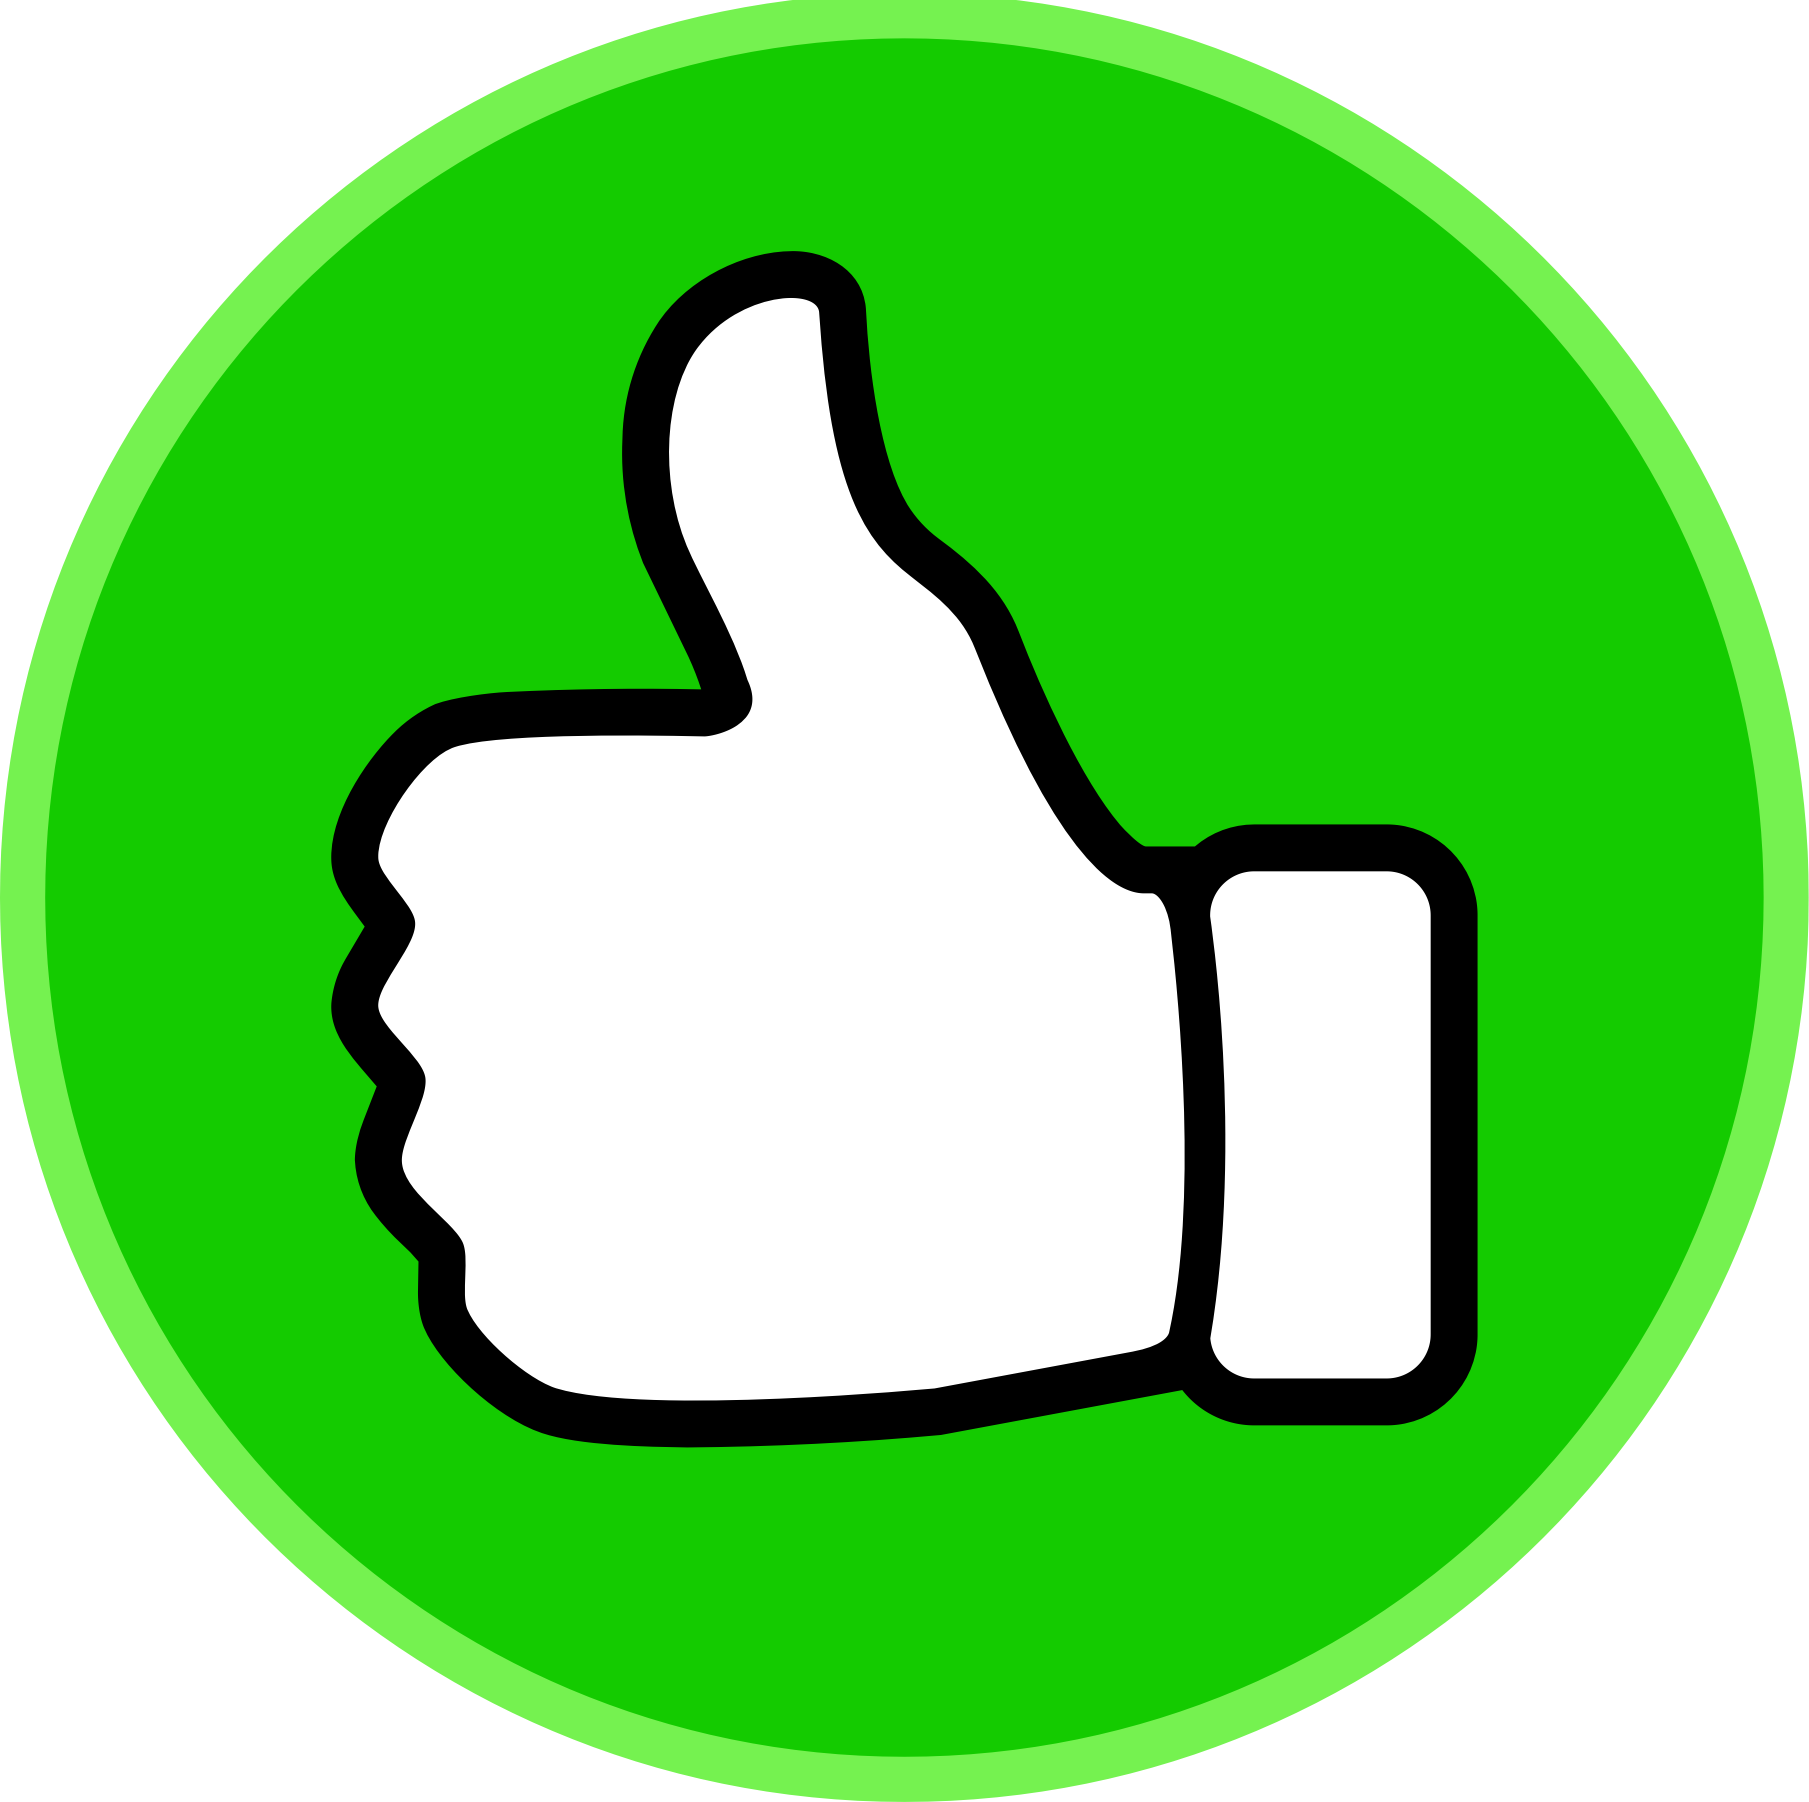 thumbs up clipart free download - photo #2